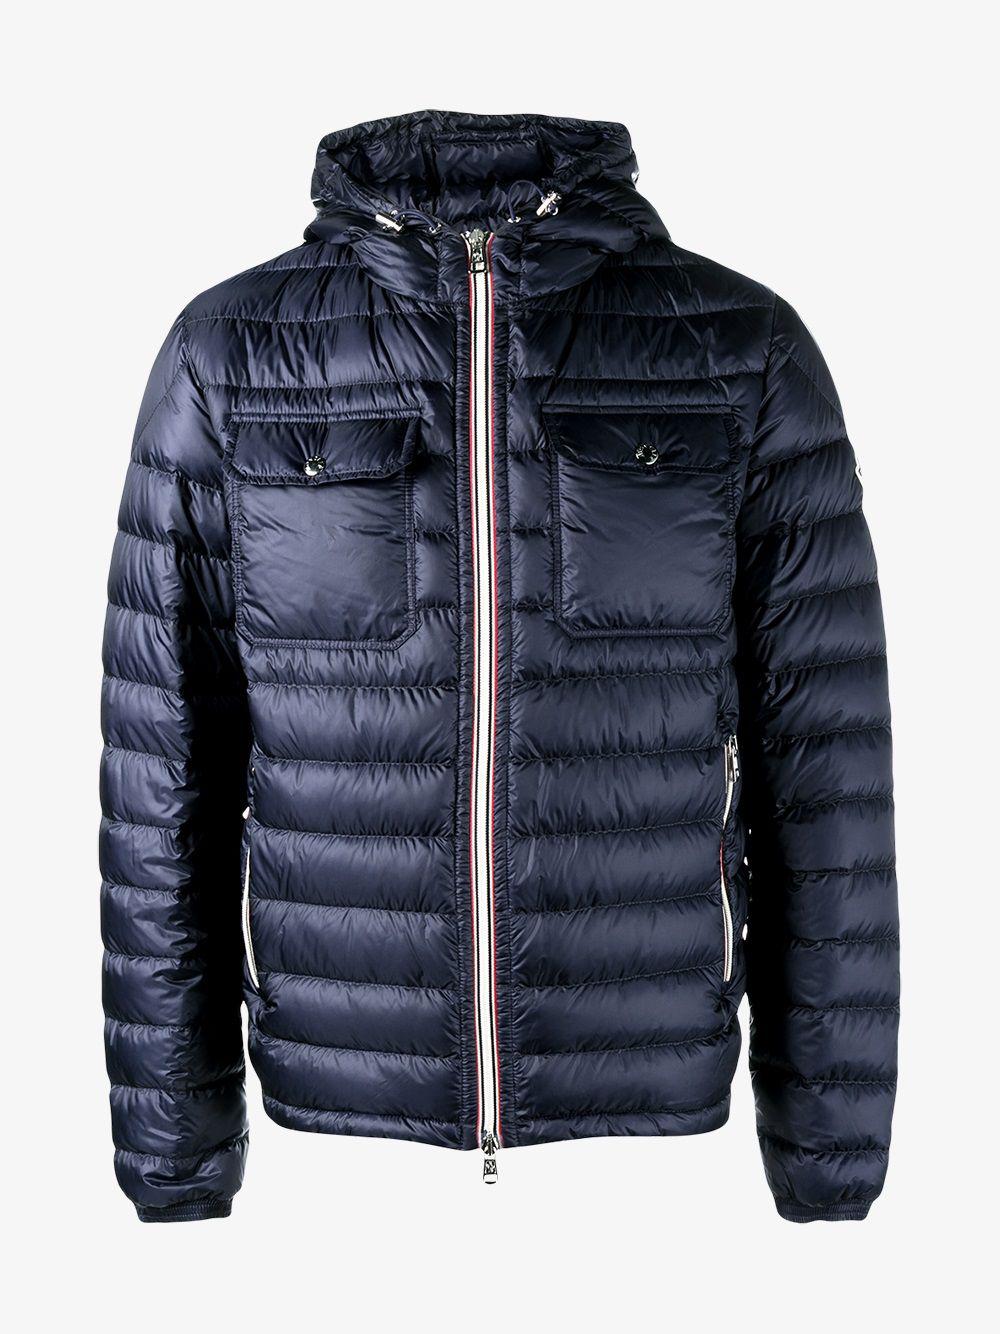 Moncler Synthetic Hooded Puffer Jacket in Blue for Men - Lyst